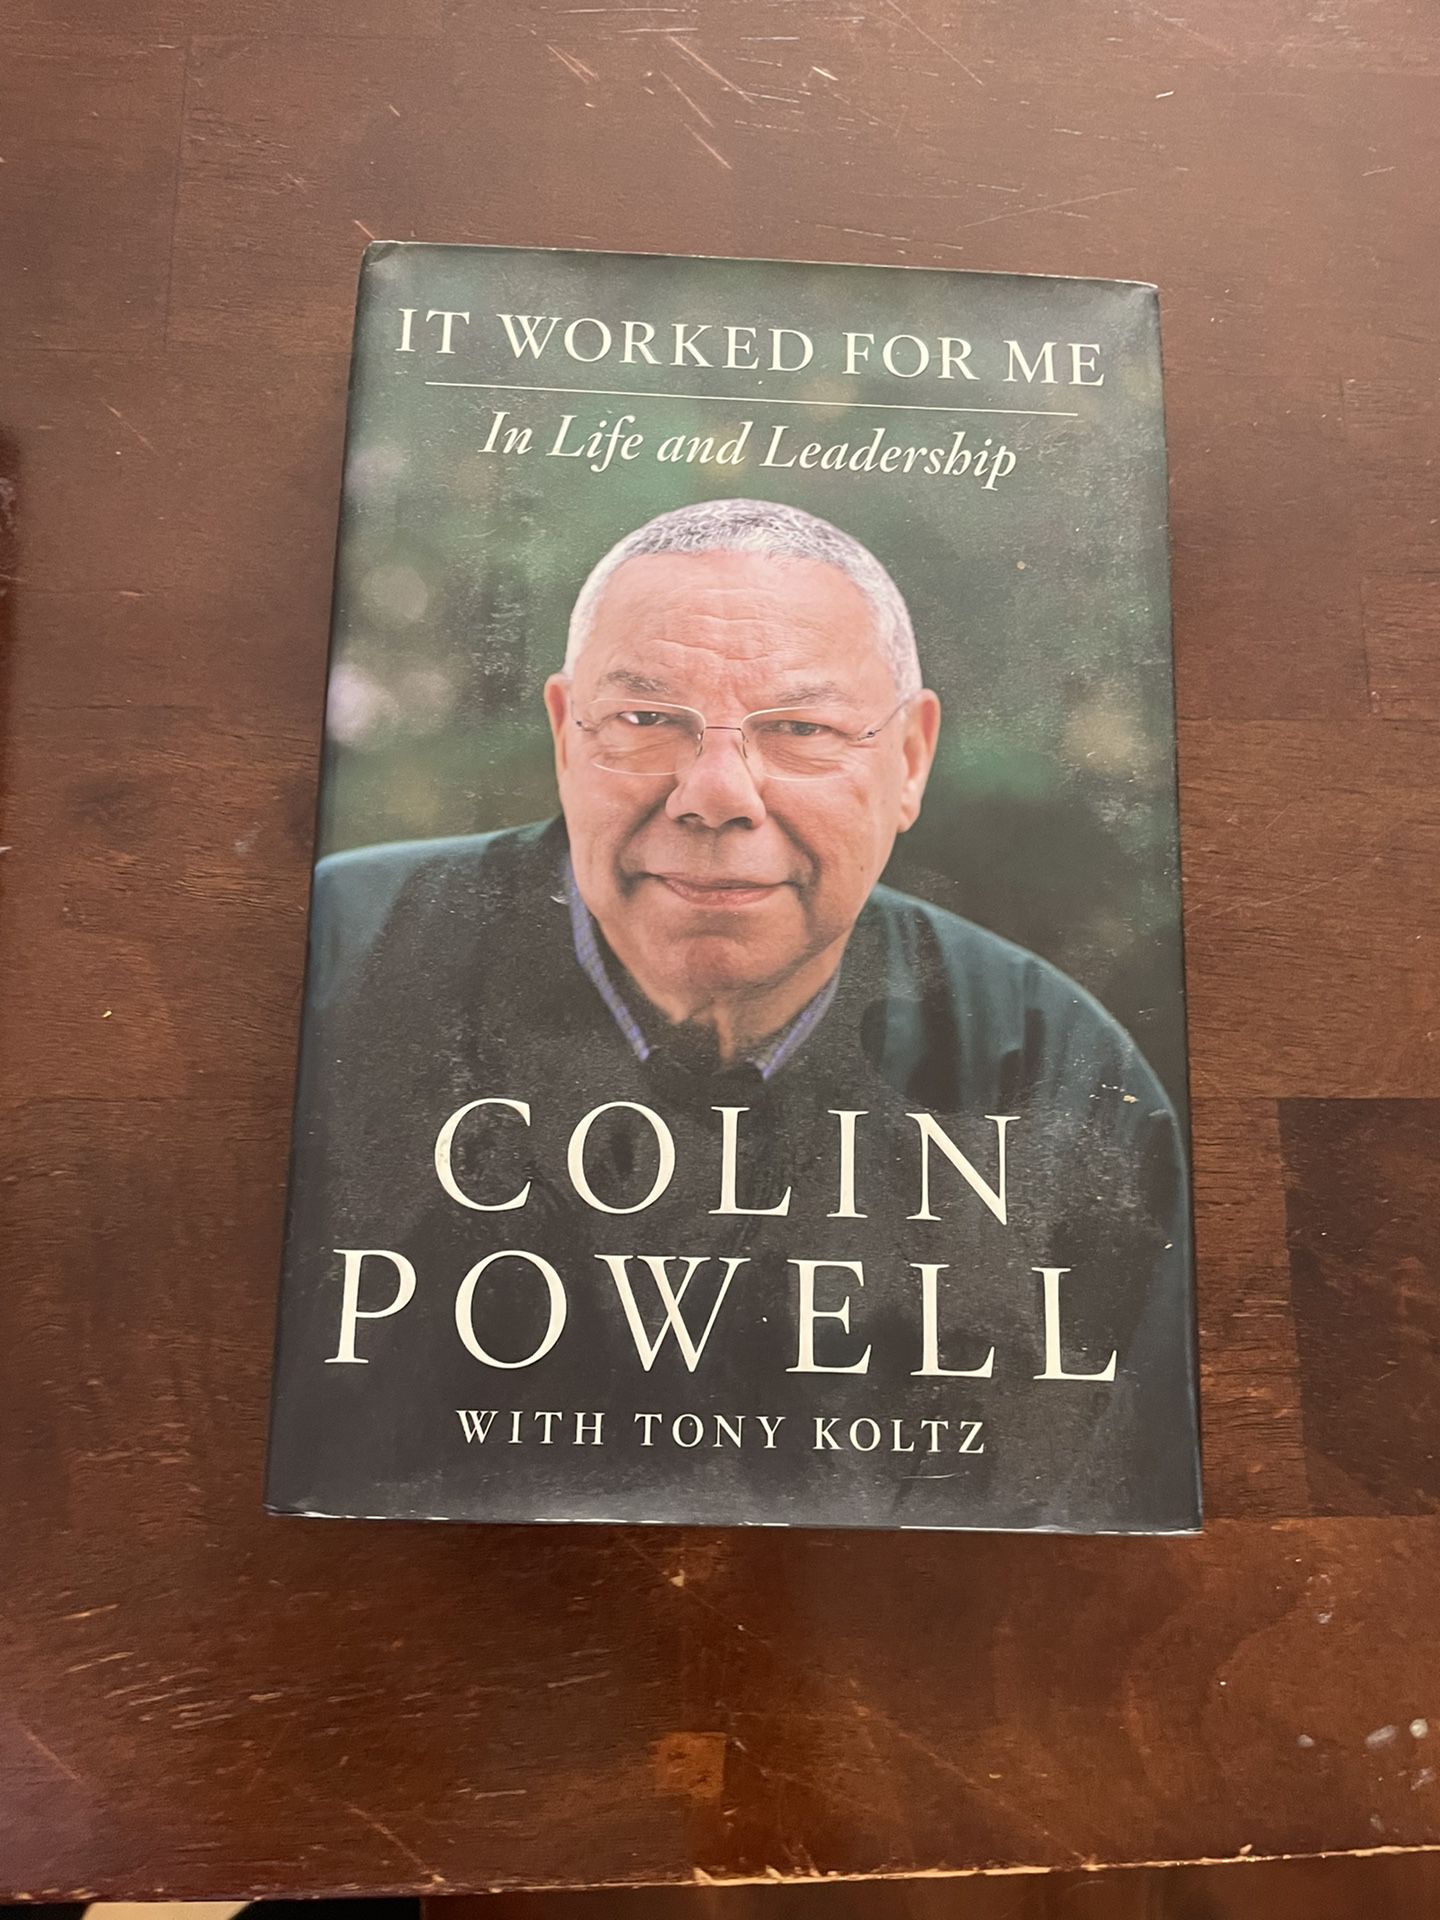 Colin Powel Signed Biography $30 OBO